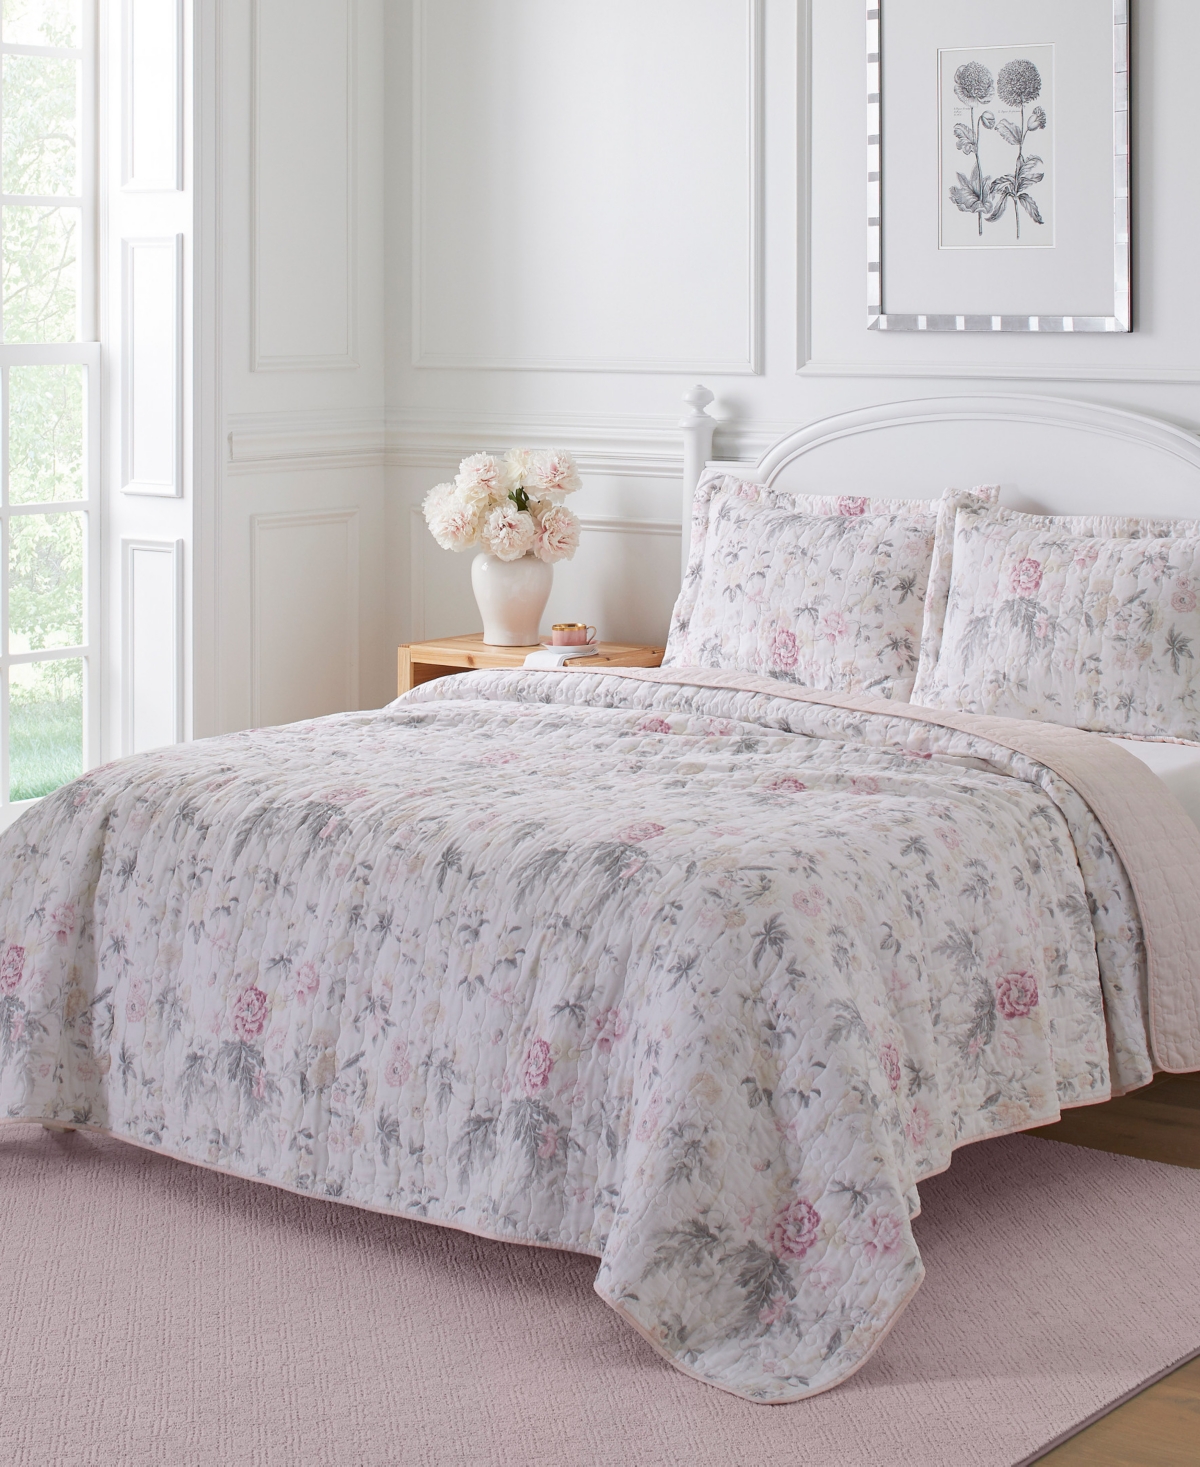 Laura Ashley Breezy Floral Reversible 3 Piece Quilt Set, Full/queen In Pastel Grey